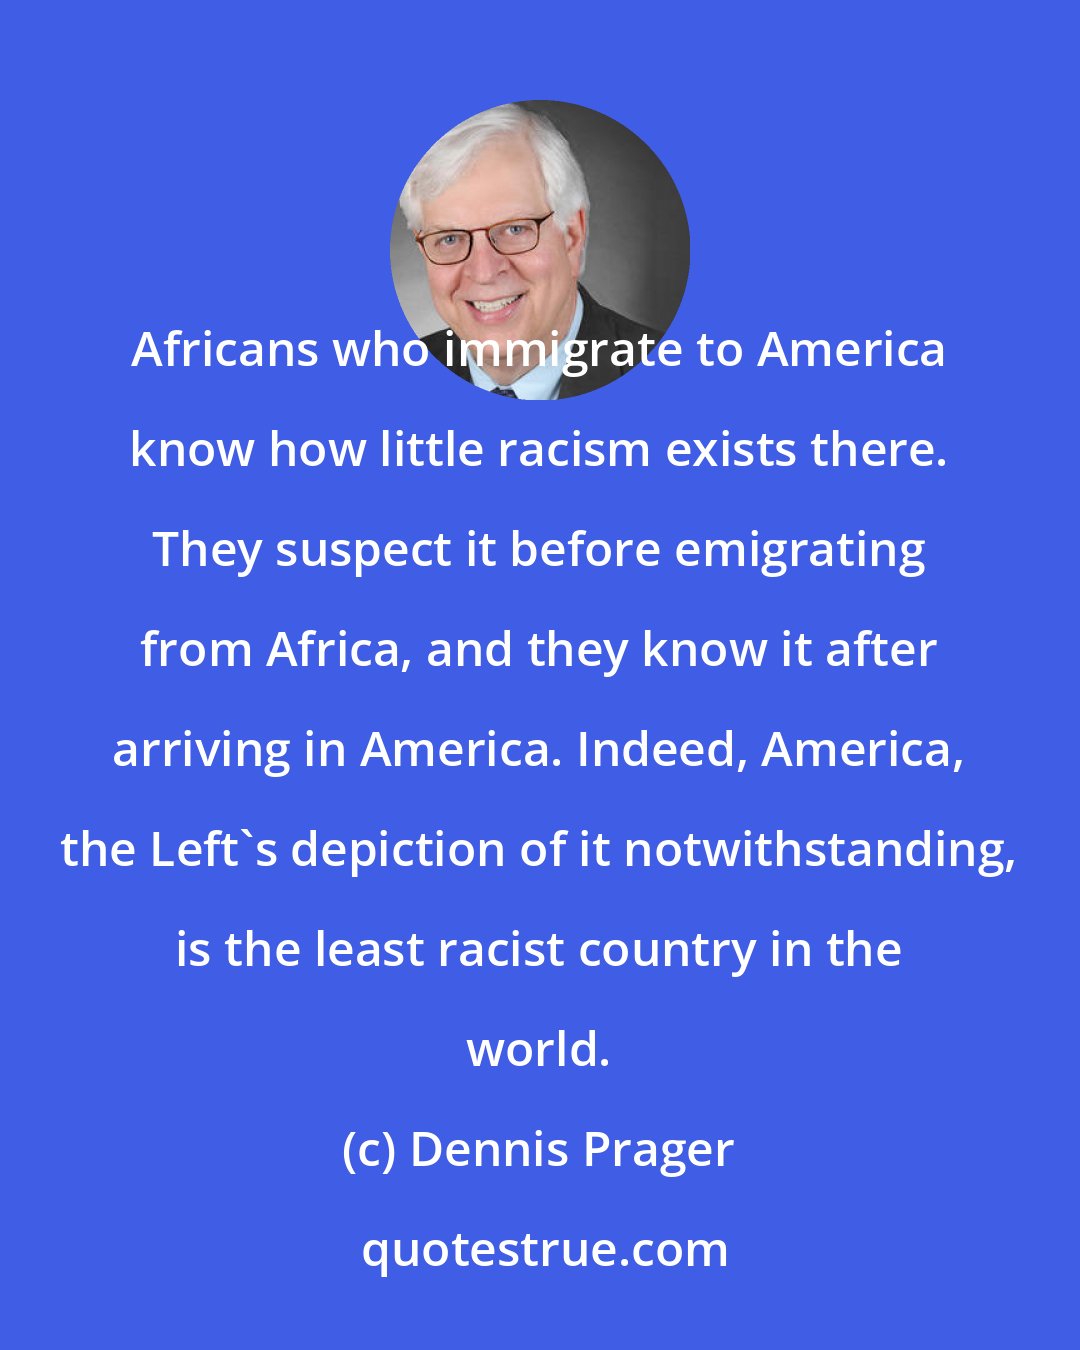 Dennis Prager: Africans who immigrate to America know how little racism exists there. They suspect it before emigrating from Africa, and they know it after arriving in America. Indeed, America, the Left's depiction of it notwithstanding, is the least racist country in the world.